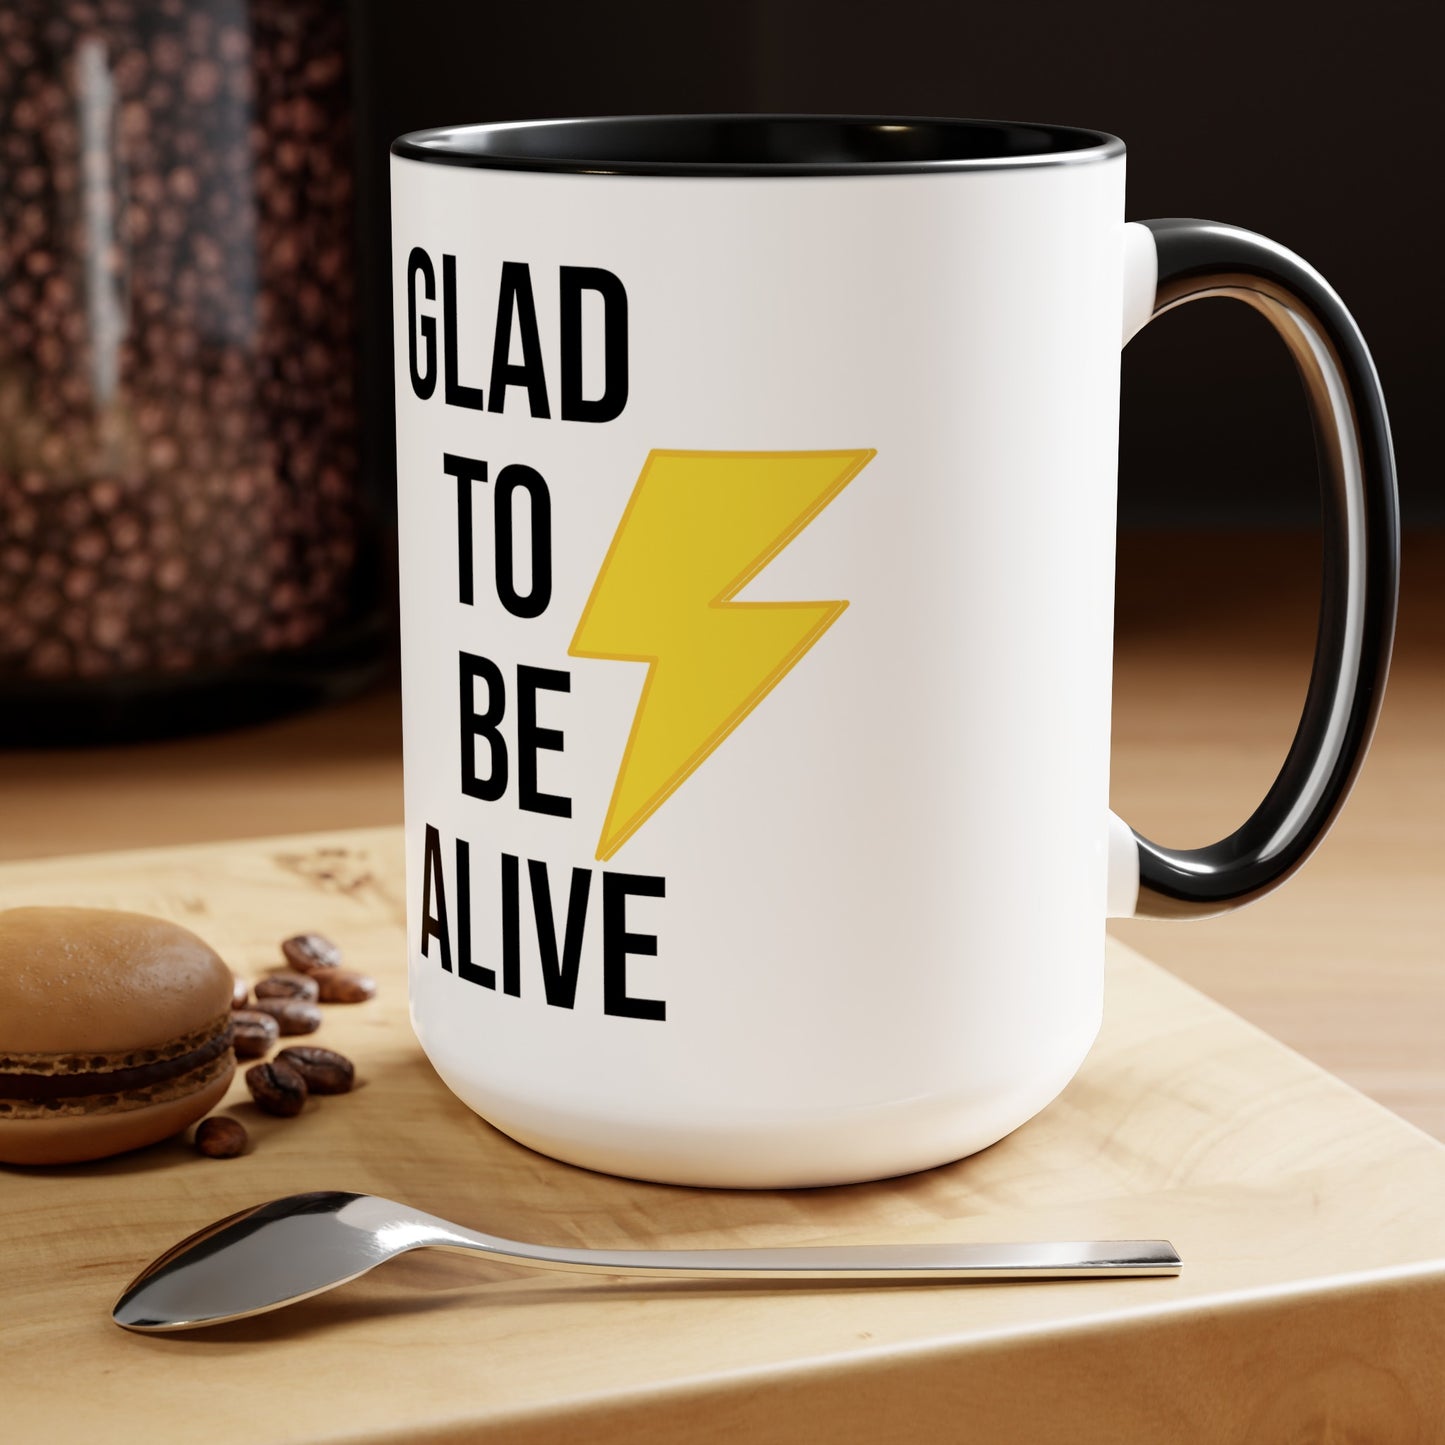 Glad To Be Alive Two-Tone Coffee Mugs, 15oz